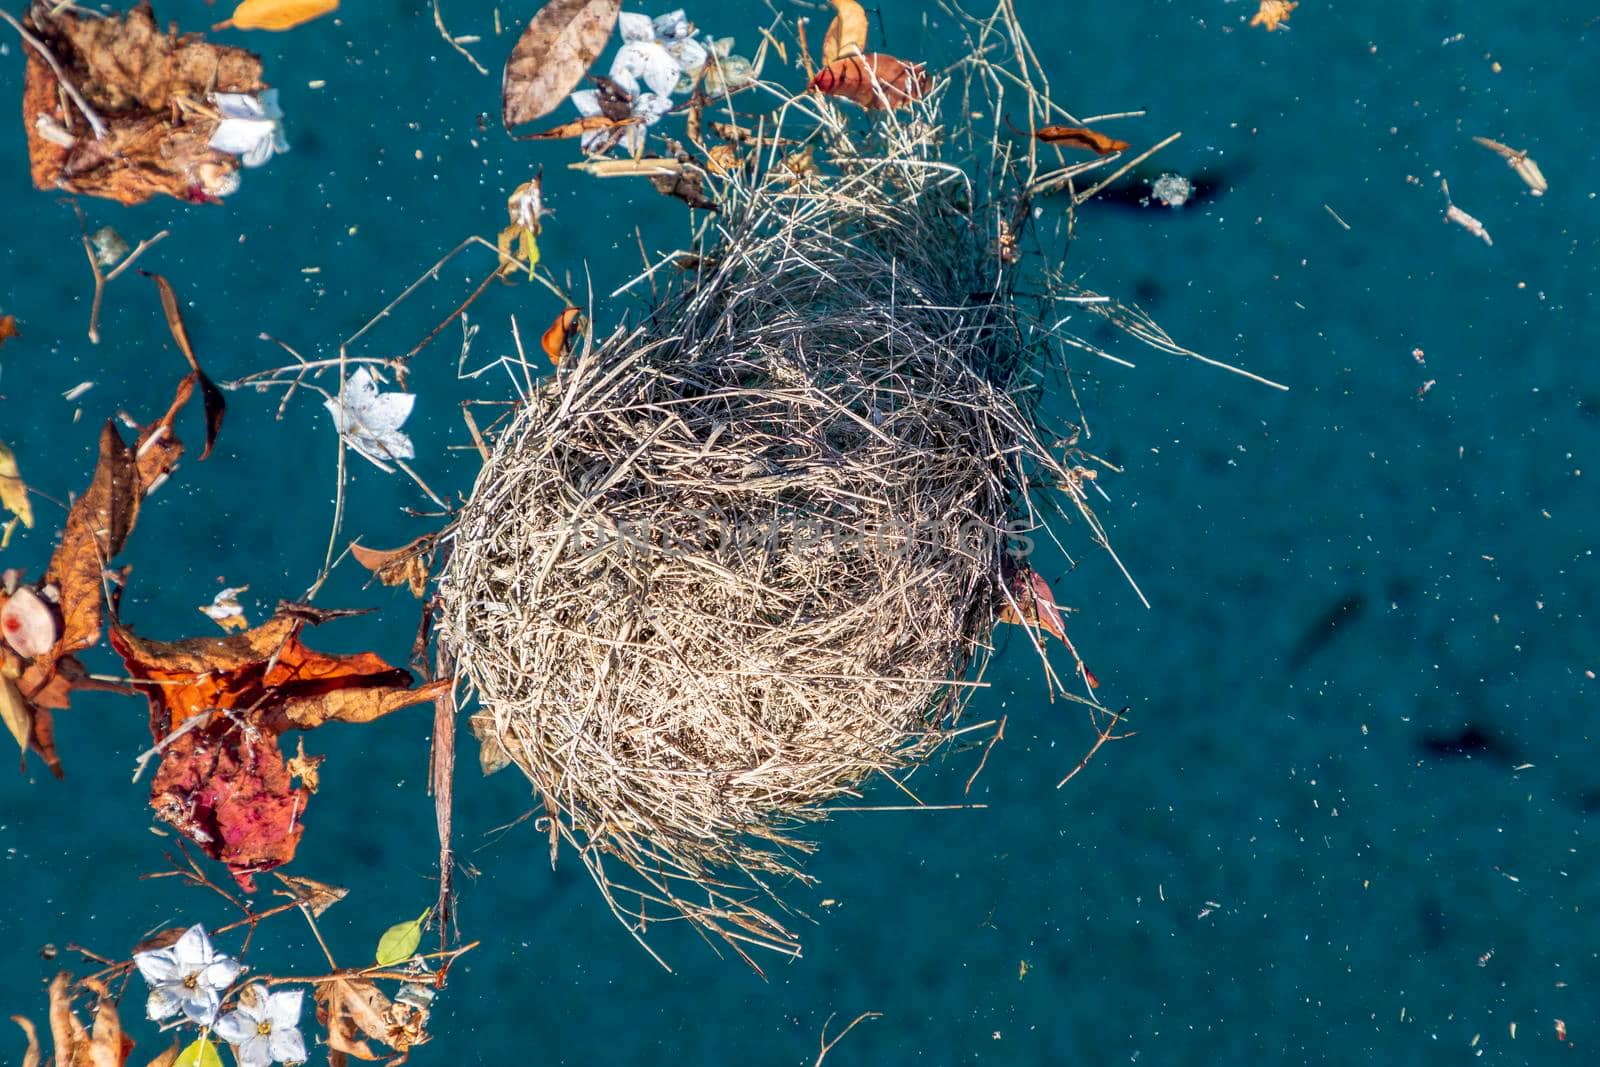 A birds nest floating in a swimming pool by WittkePhotos